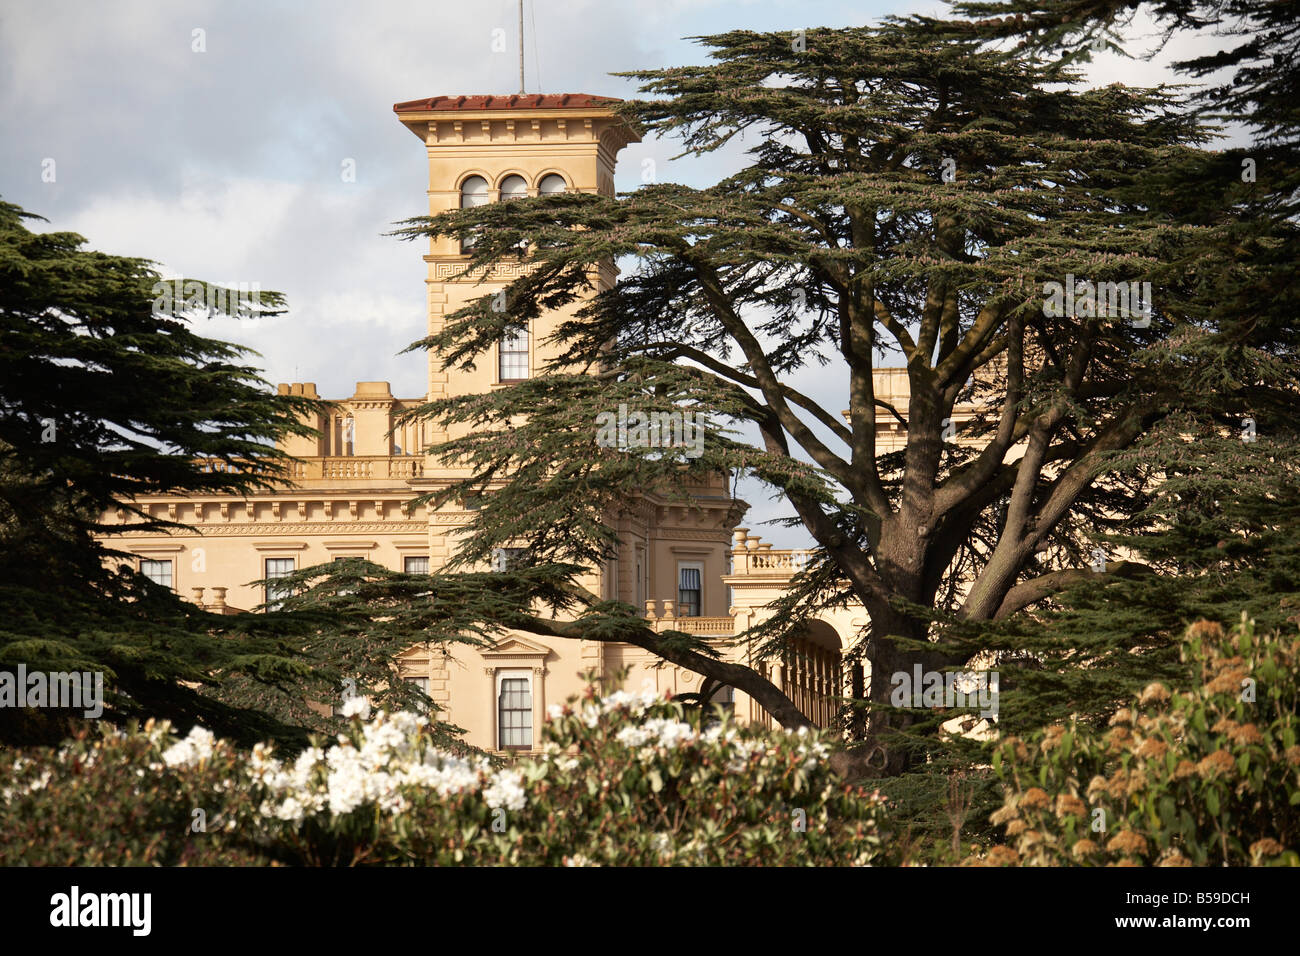 Cedar tree with Osborne House former home of Queen Victoria East Cowes Isle of Wight England UK English Heritage Stock Photo